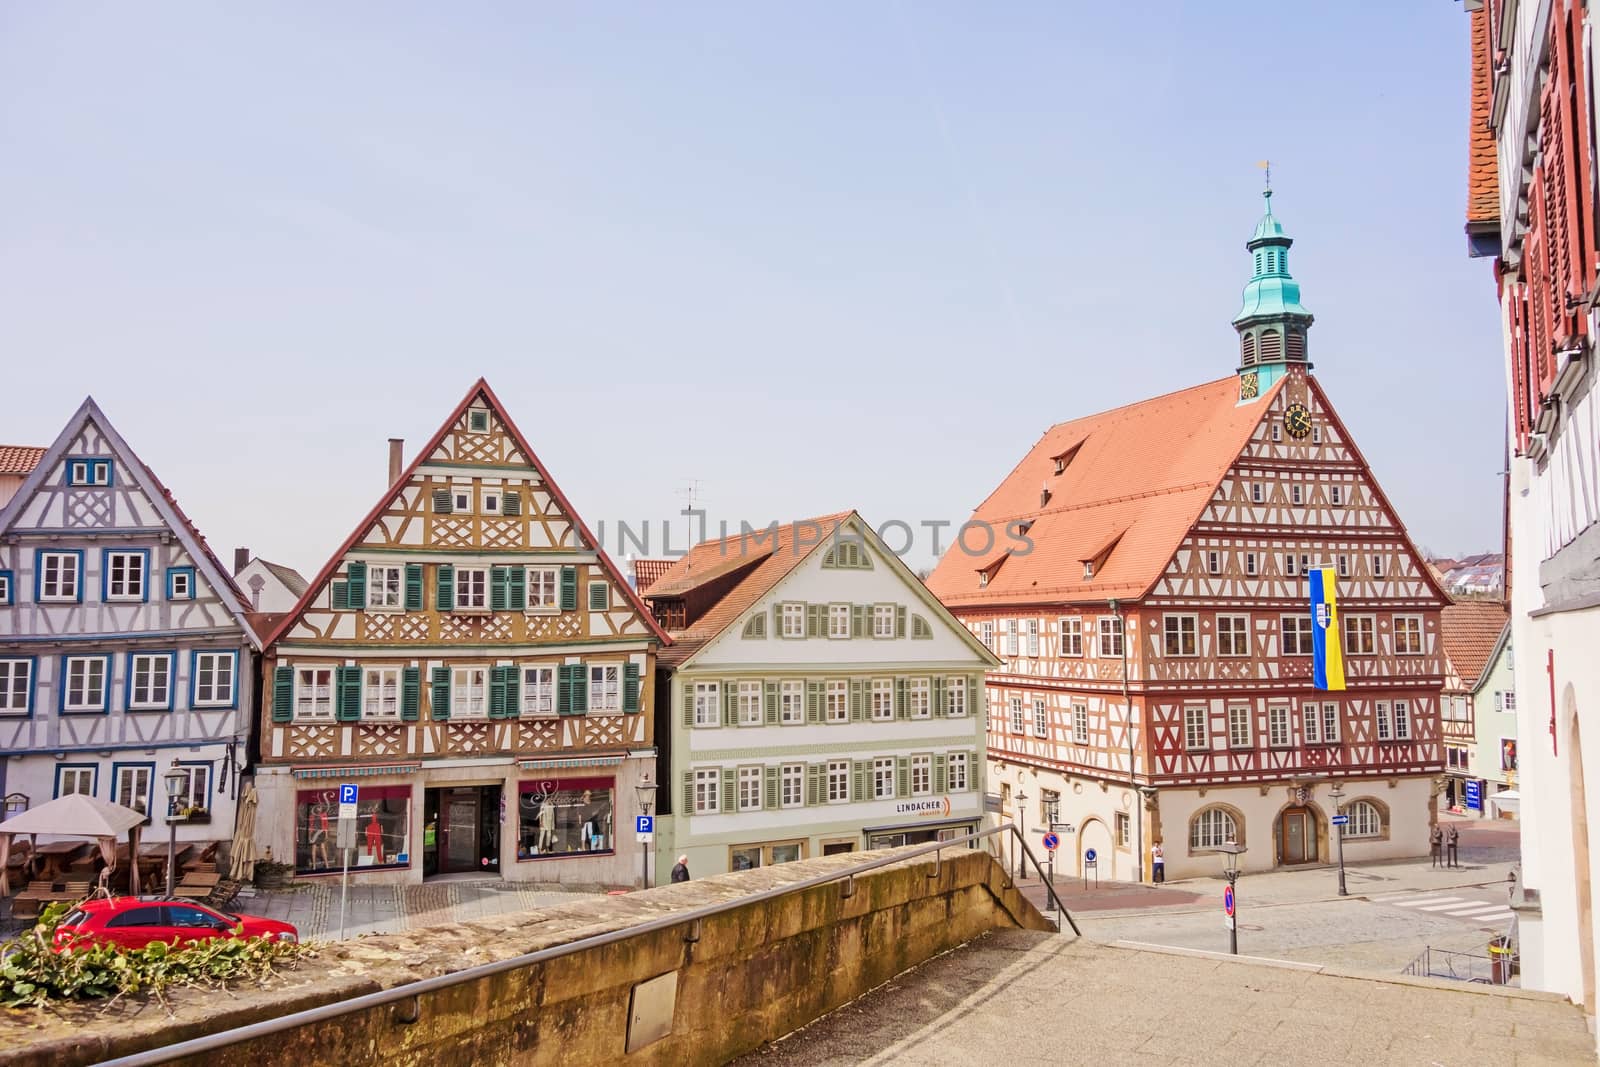 Backnang, Germany - April 03, 2016: In the city center of Backnang at marketplace, town hall on the right, half-timbered buildings.